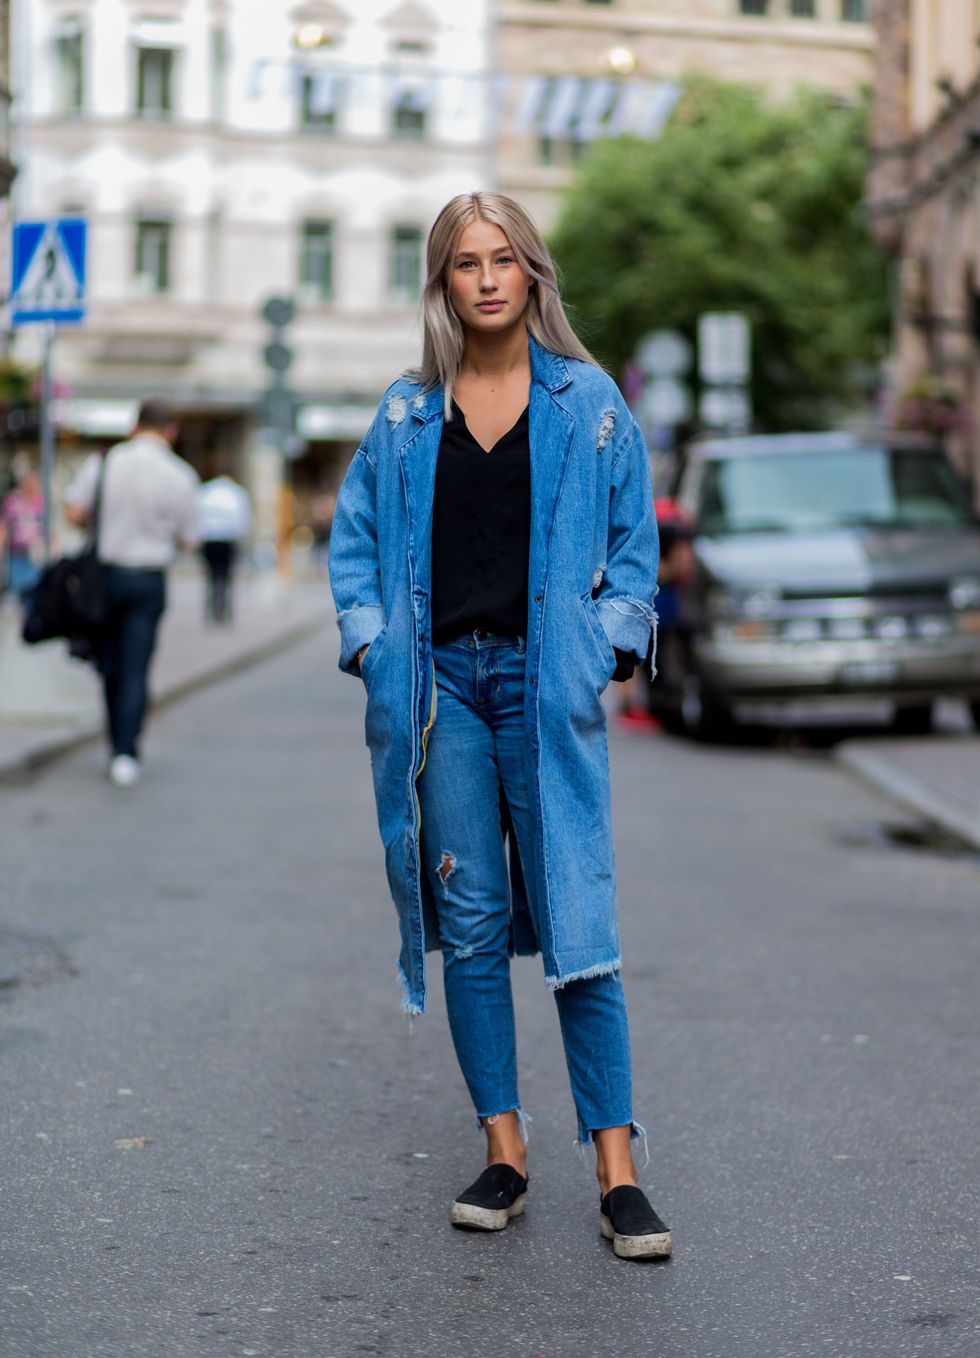 Clothing, Leg, Road, Denim, Infrastructure, Street, Textile, Outerwear, Jeans, Style, 